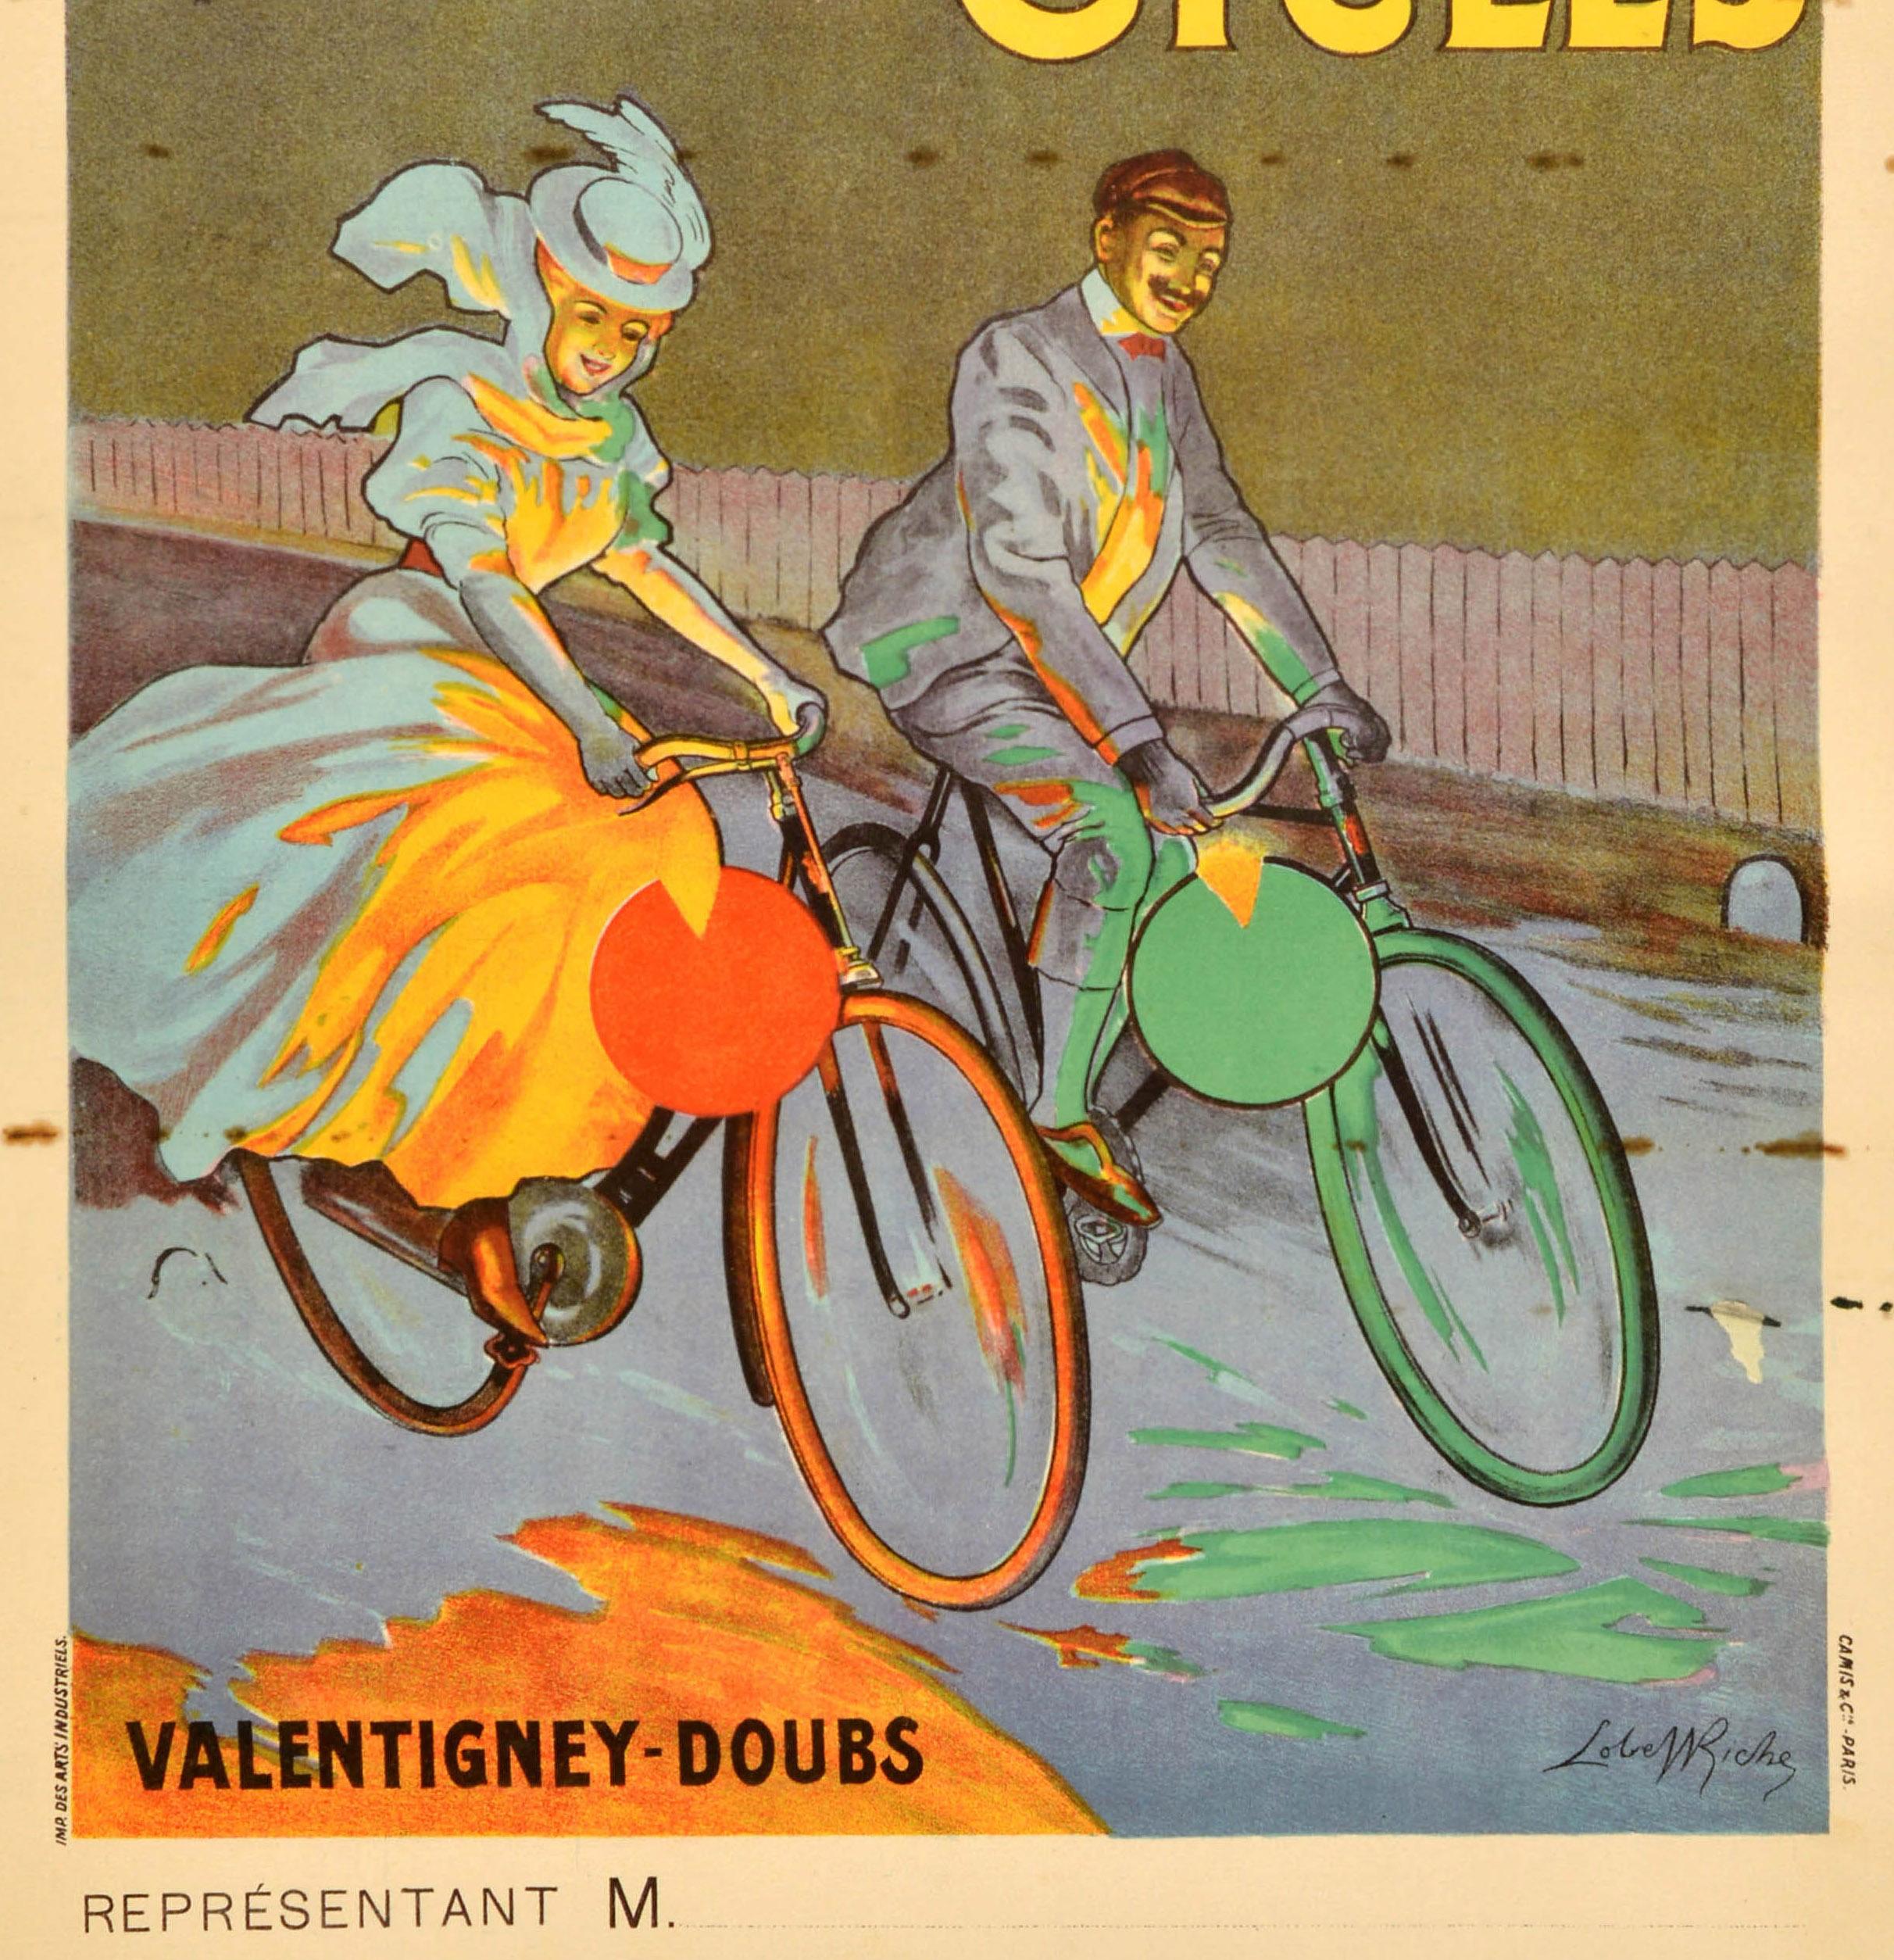 Original antique bicycle advertising poster for Peugeot Cycles featuring a great illustration of a smiling elegant lady in a fashionable dress, flowing scarf and hat and a smartly dressed gentleman cycling on red and green bikes alongside a railway